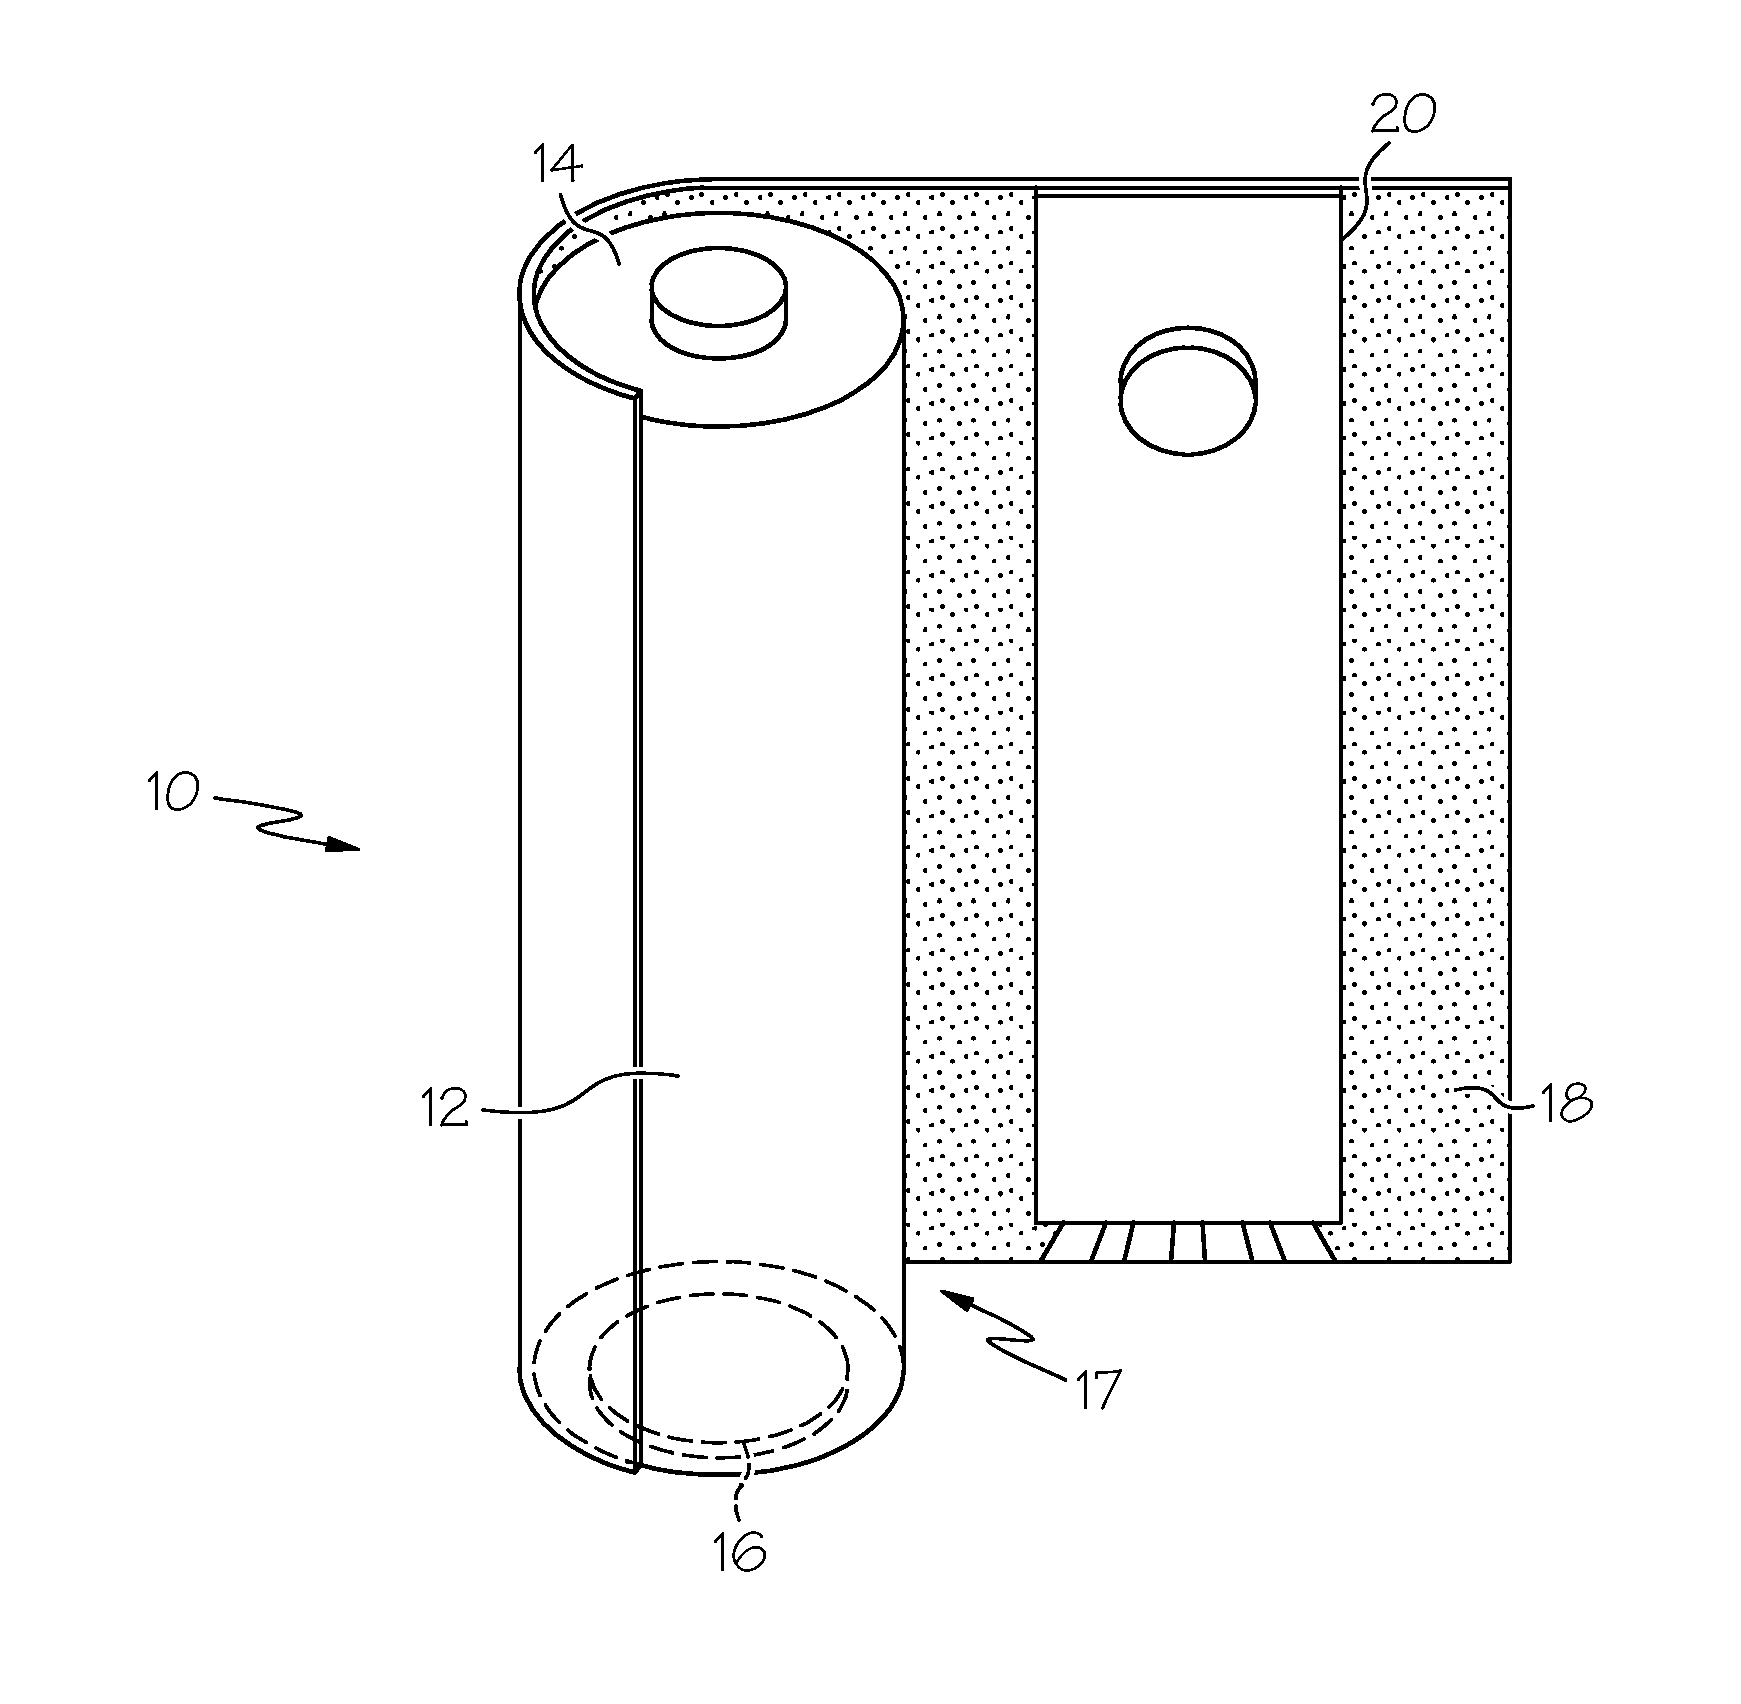 Apparatuses and methods for determining potential energy stored in an electrochemical cell